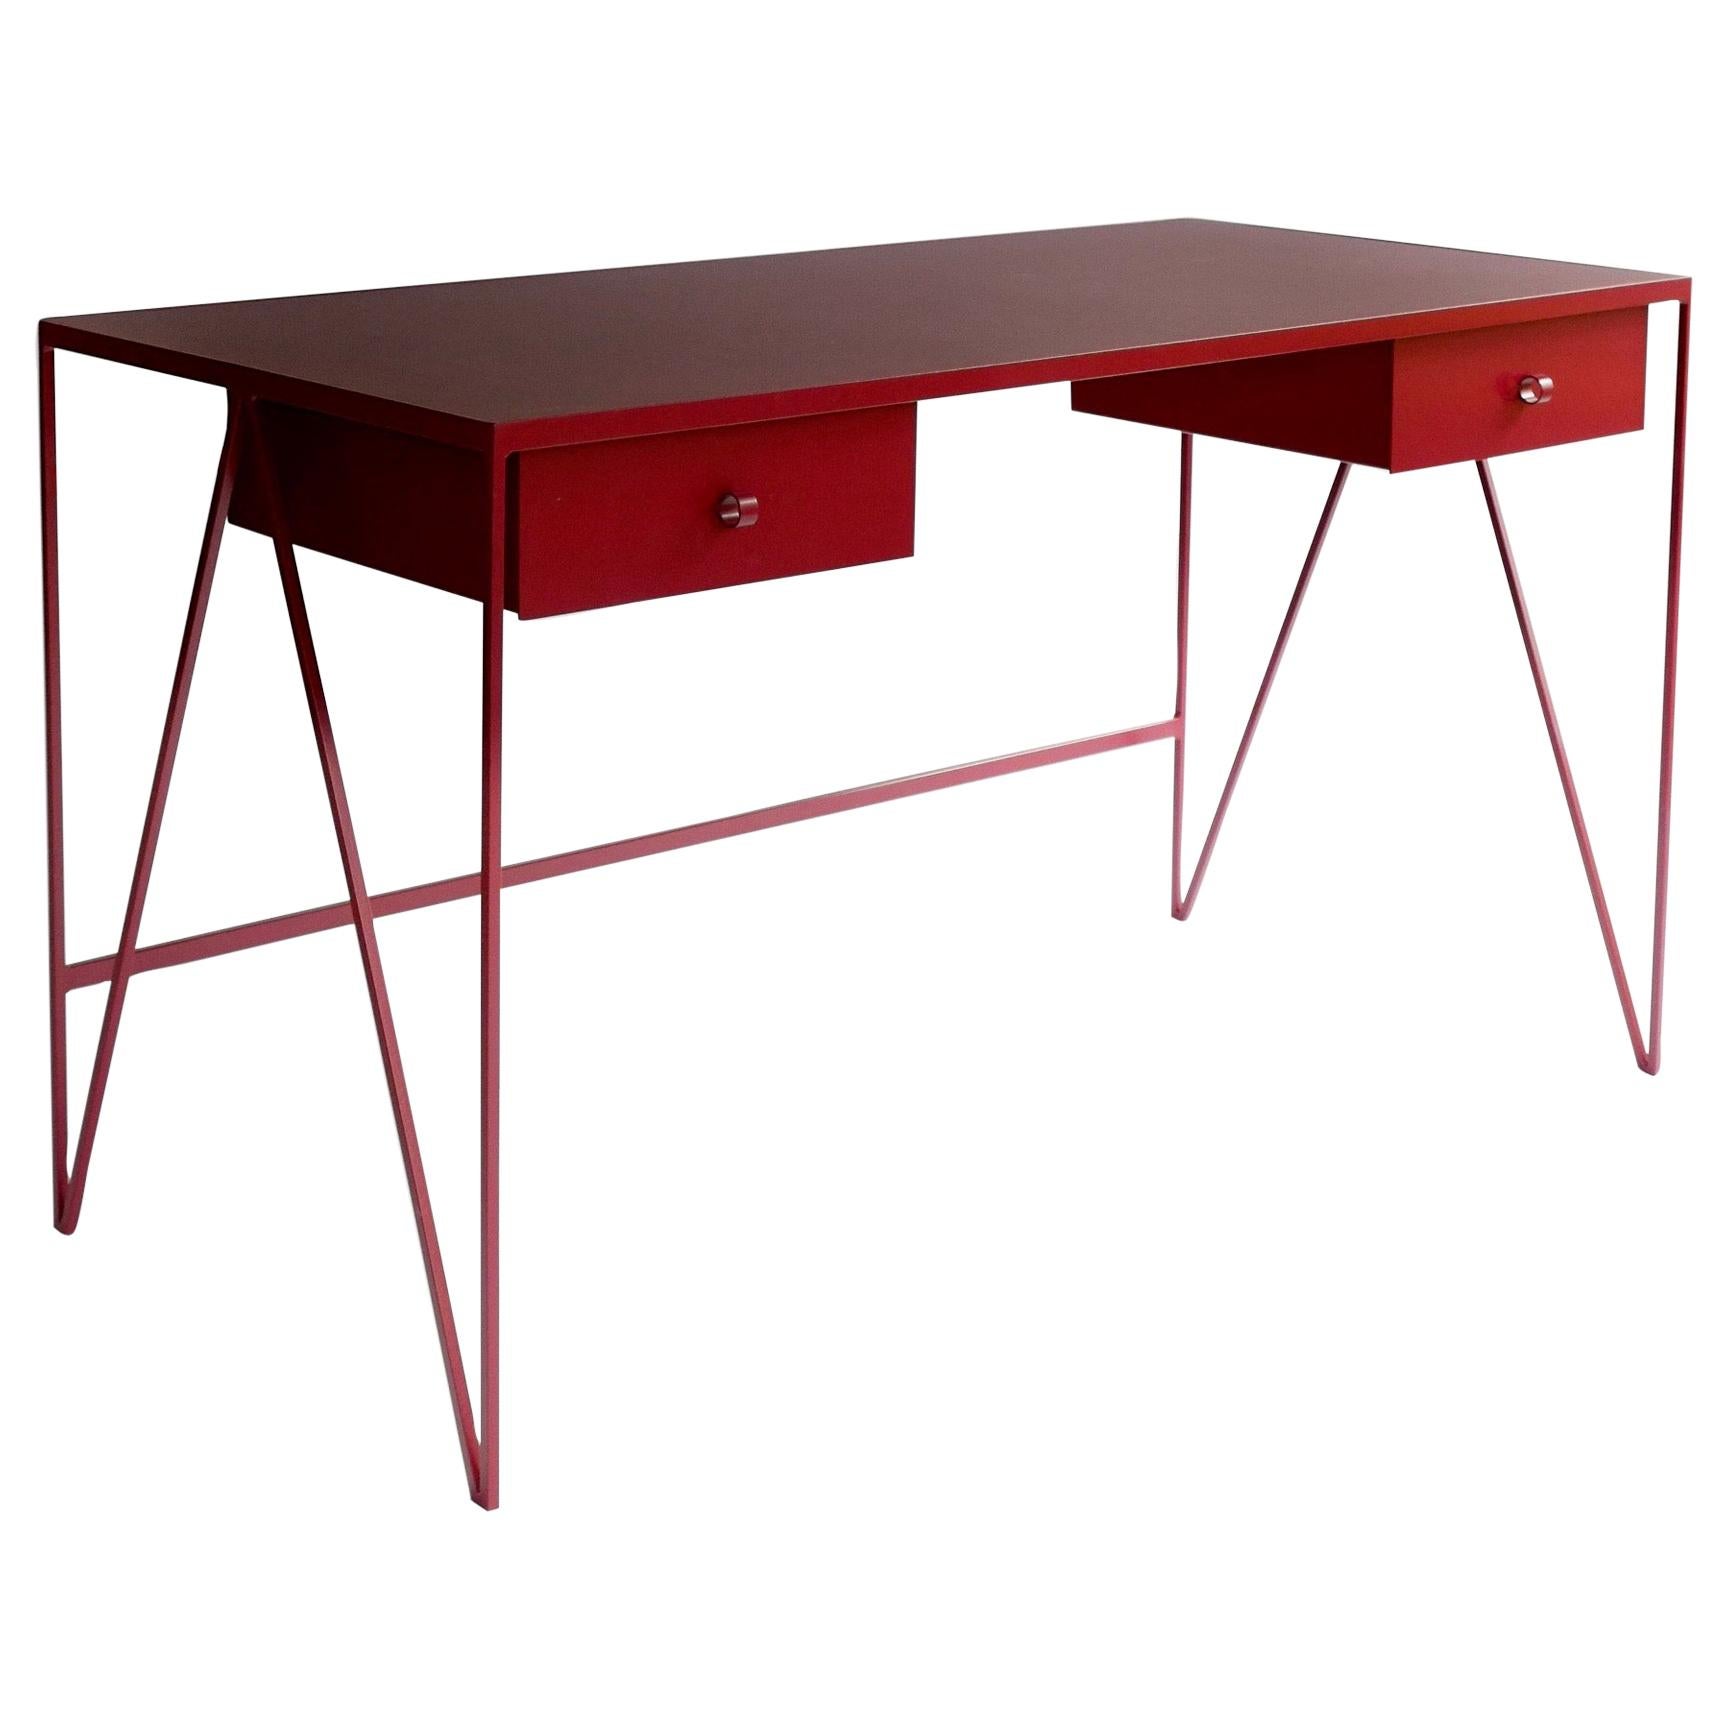 Large Bespoke Study Desk with Linoleum Top and Drawer, Customizable